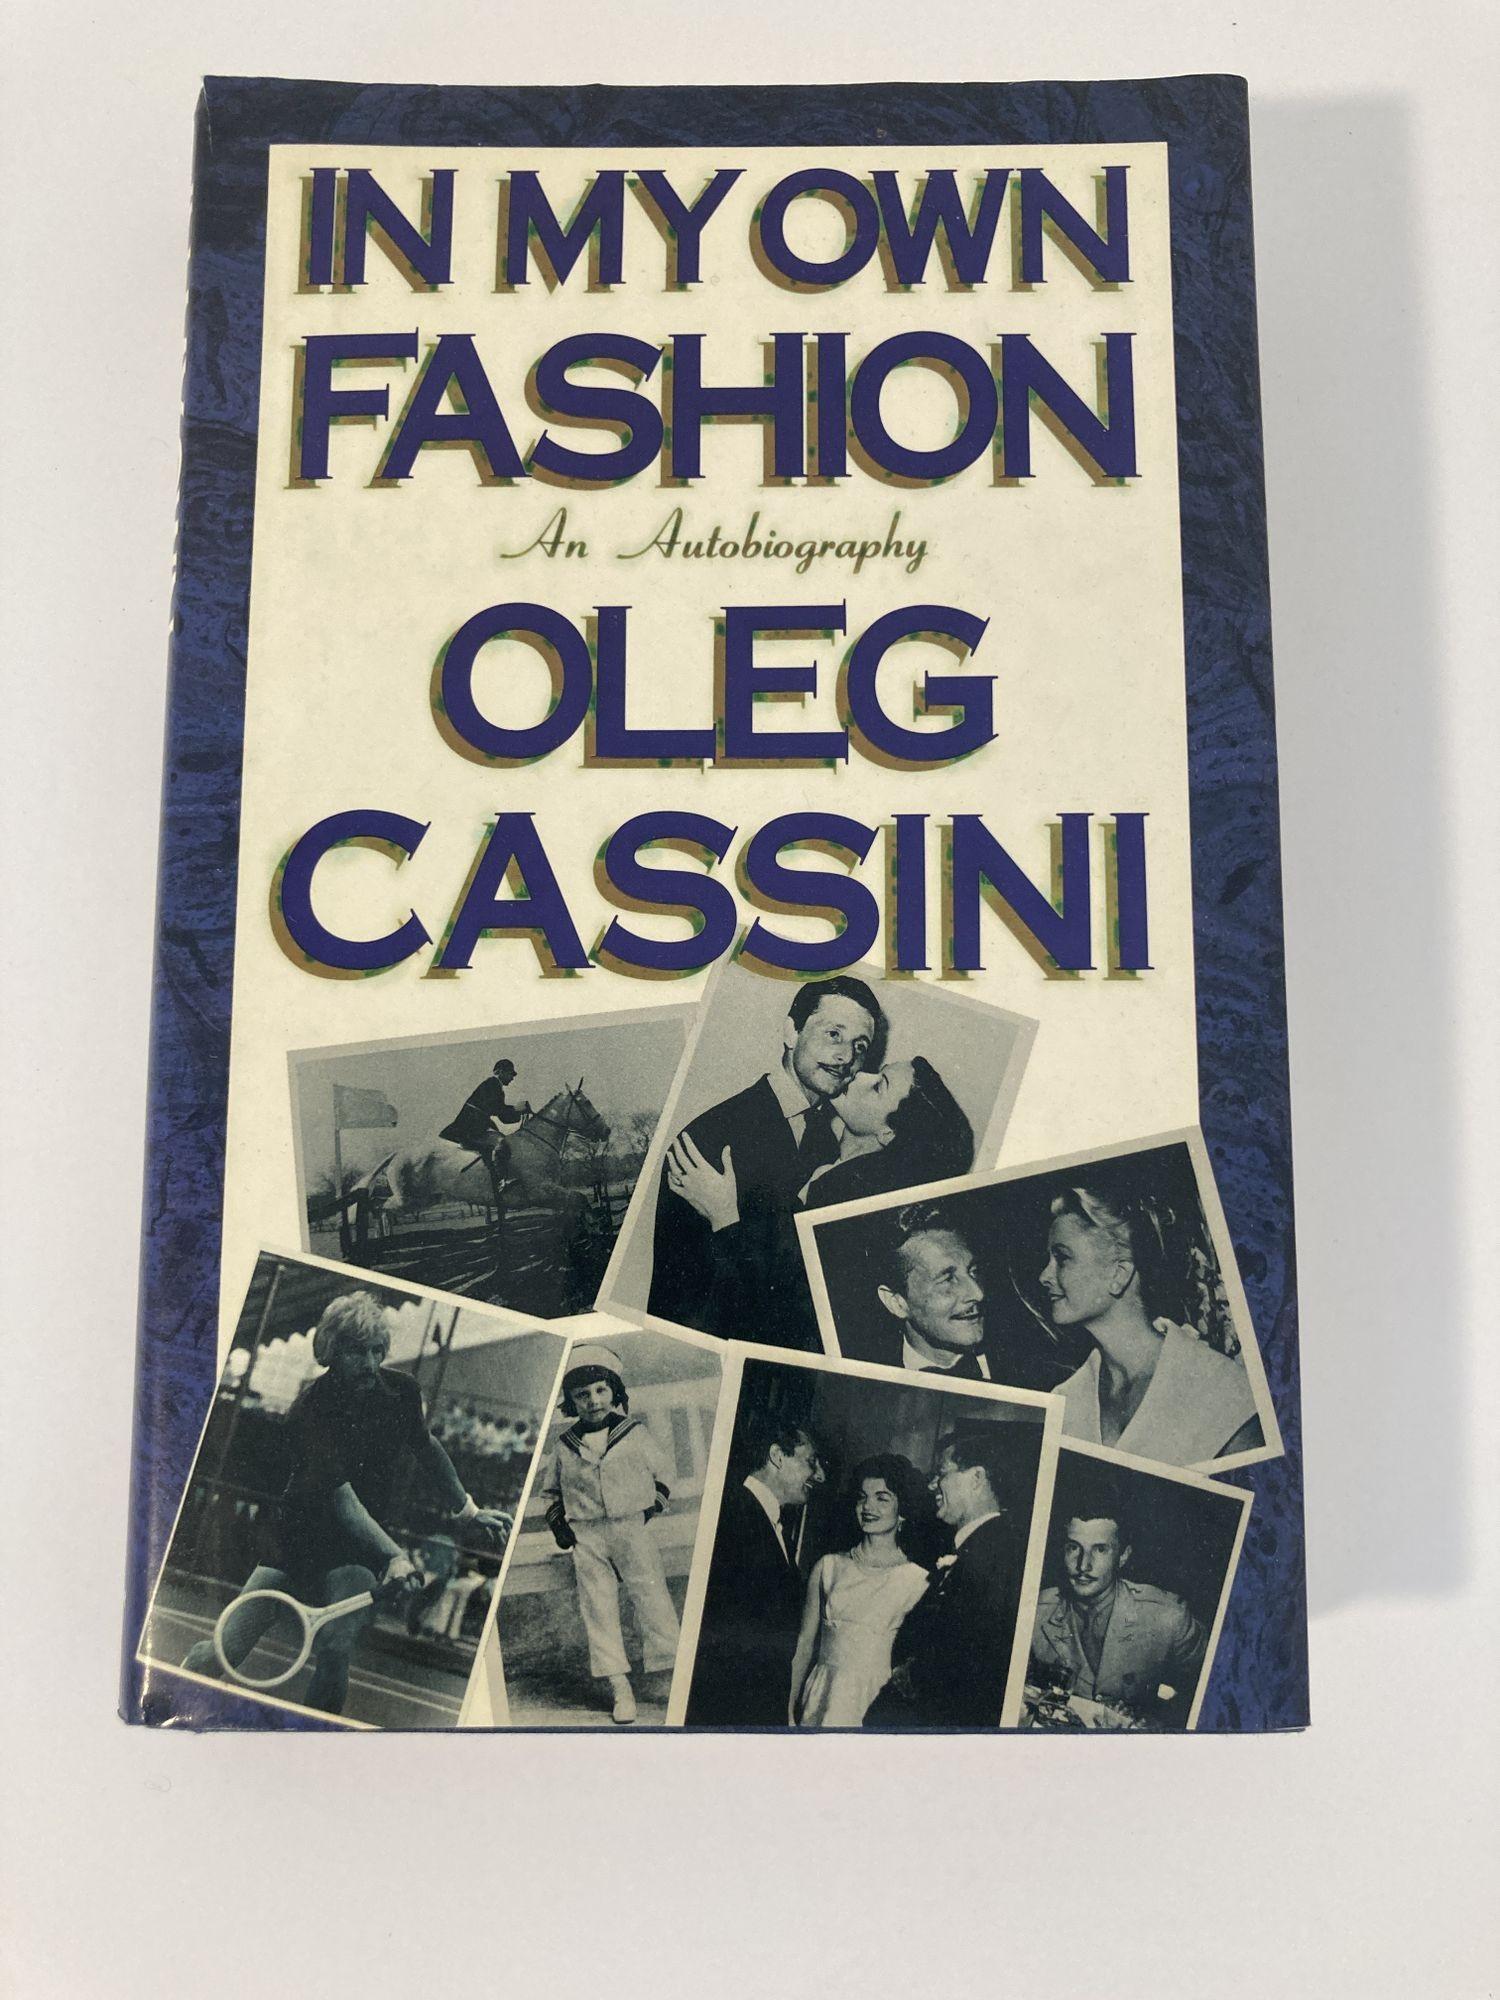 In My Own Fashion Oleg Cassidy. 1st edition 1987.
In My Own Fashion: An Autobiography Oleg Cassini.

At once outrageous and elegant, this witty memoir offers Cassini's unparalleled intimate perspective on the Golden Age of Hollywood, the Kennedy